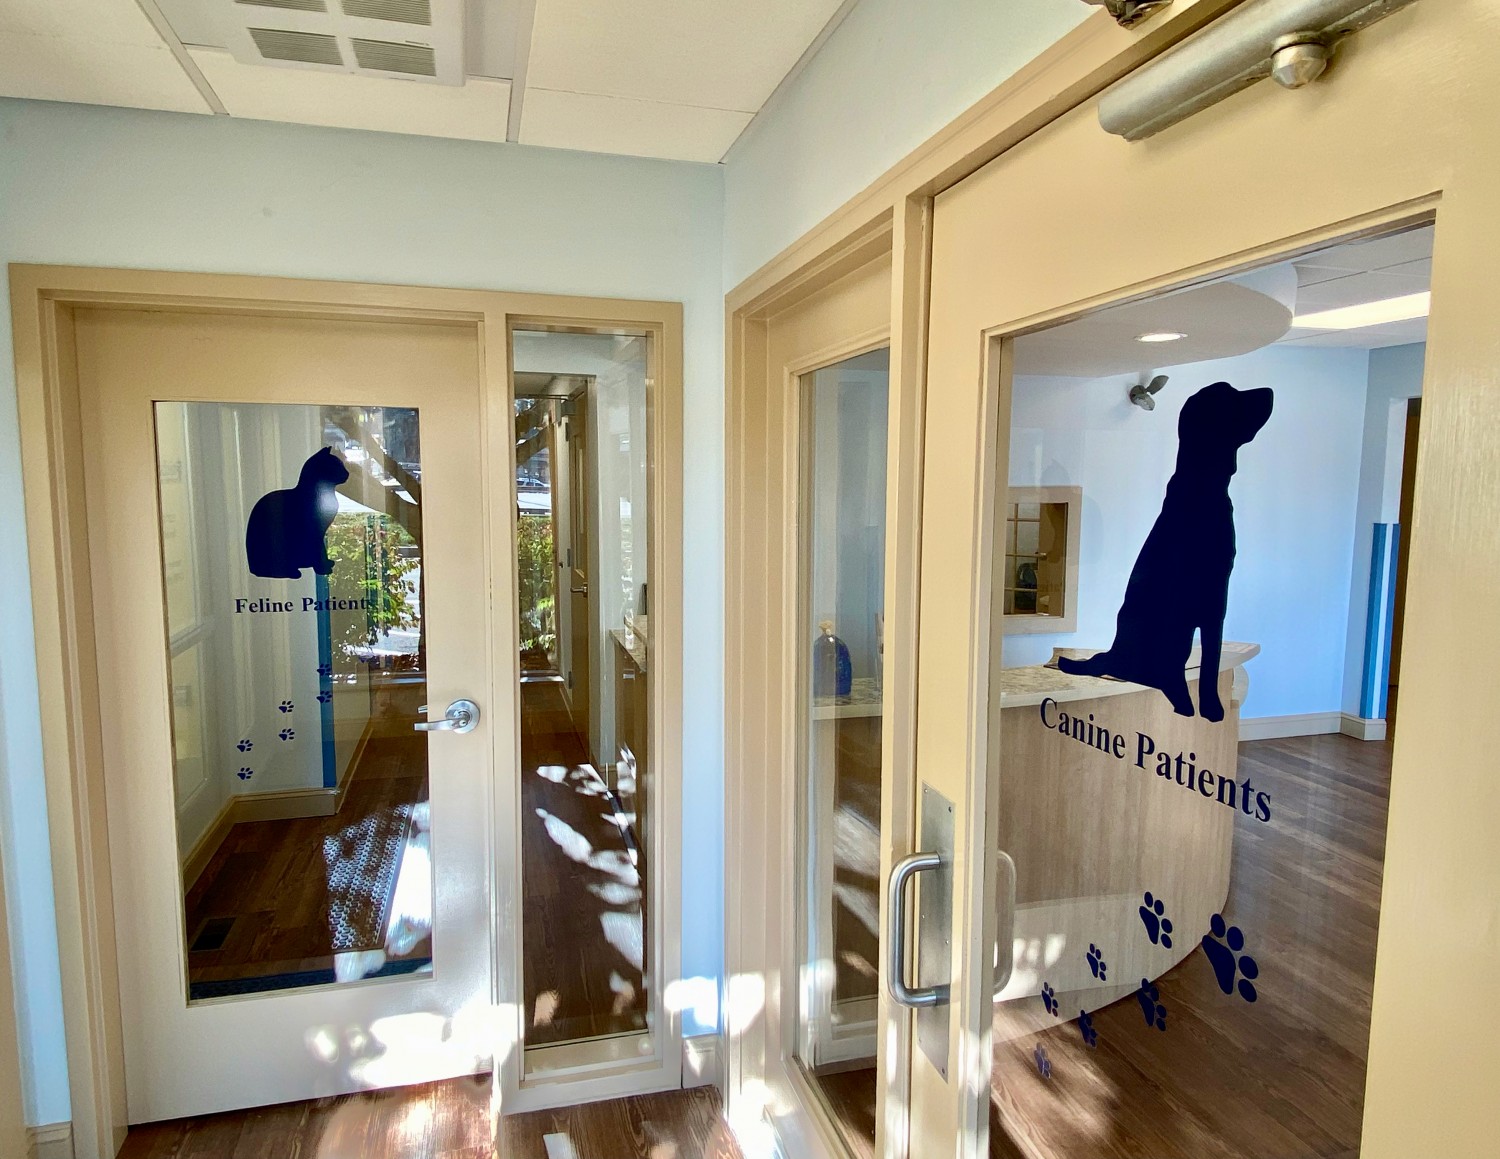 Separate Entrances For Our Feline and Canine Patients